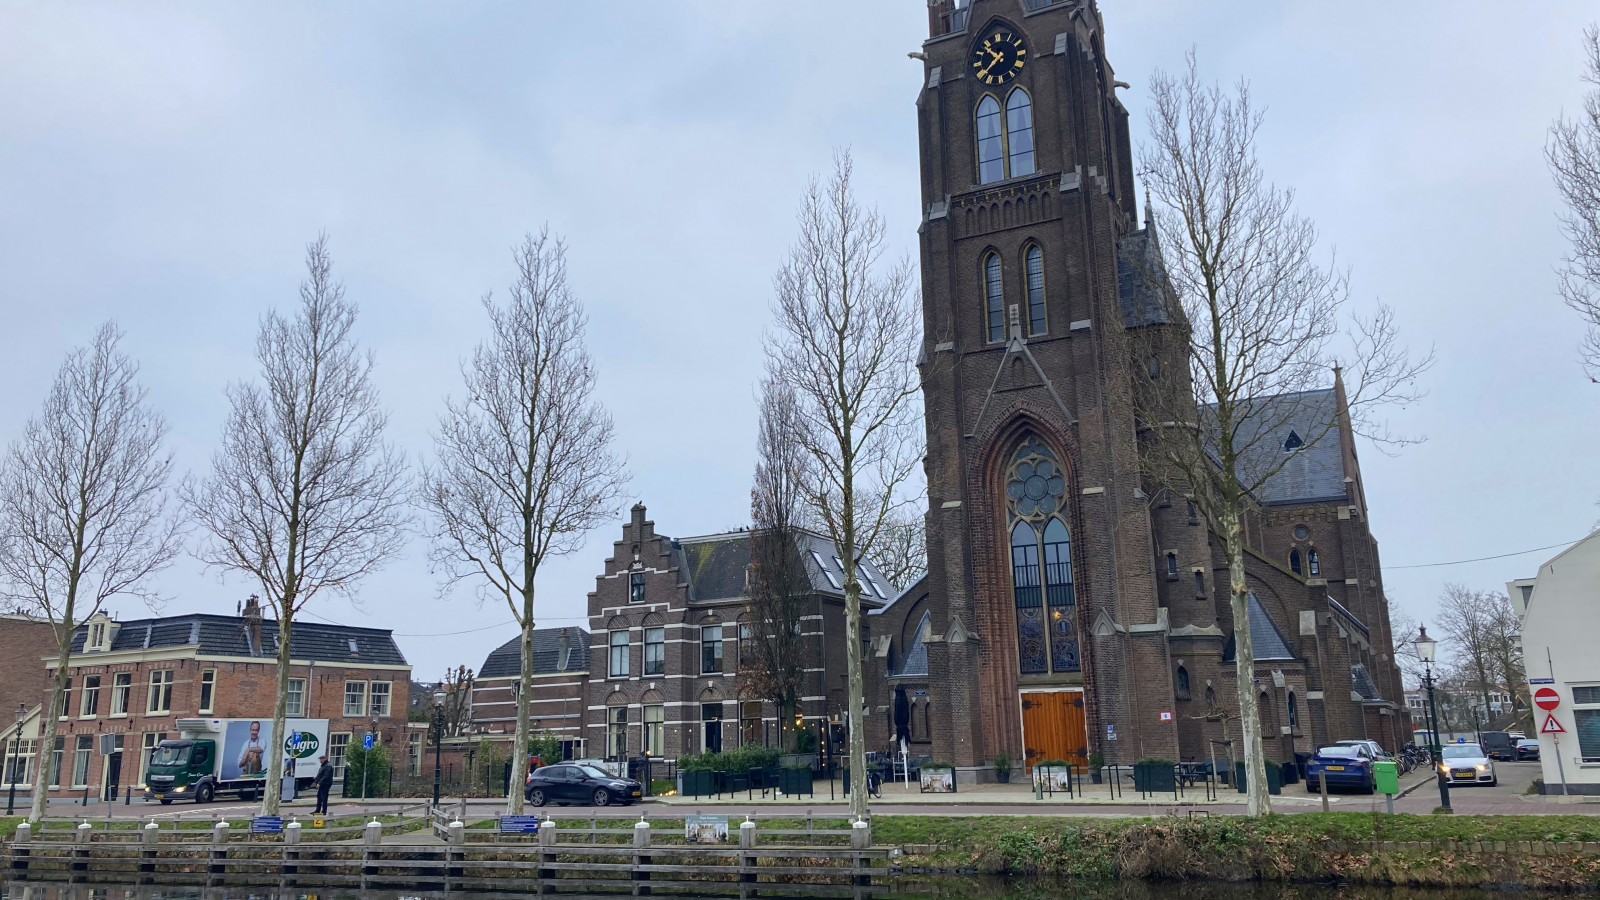 The center of Weesp